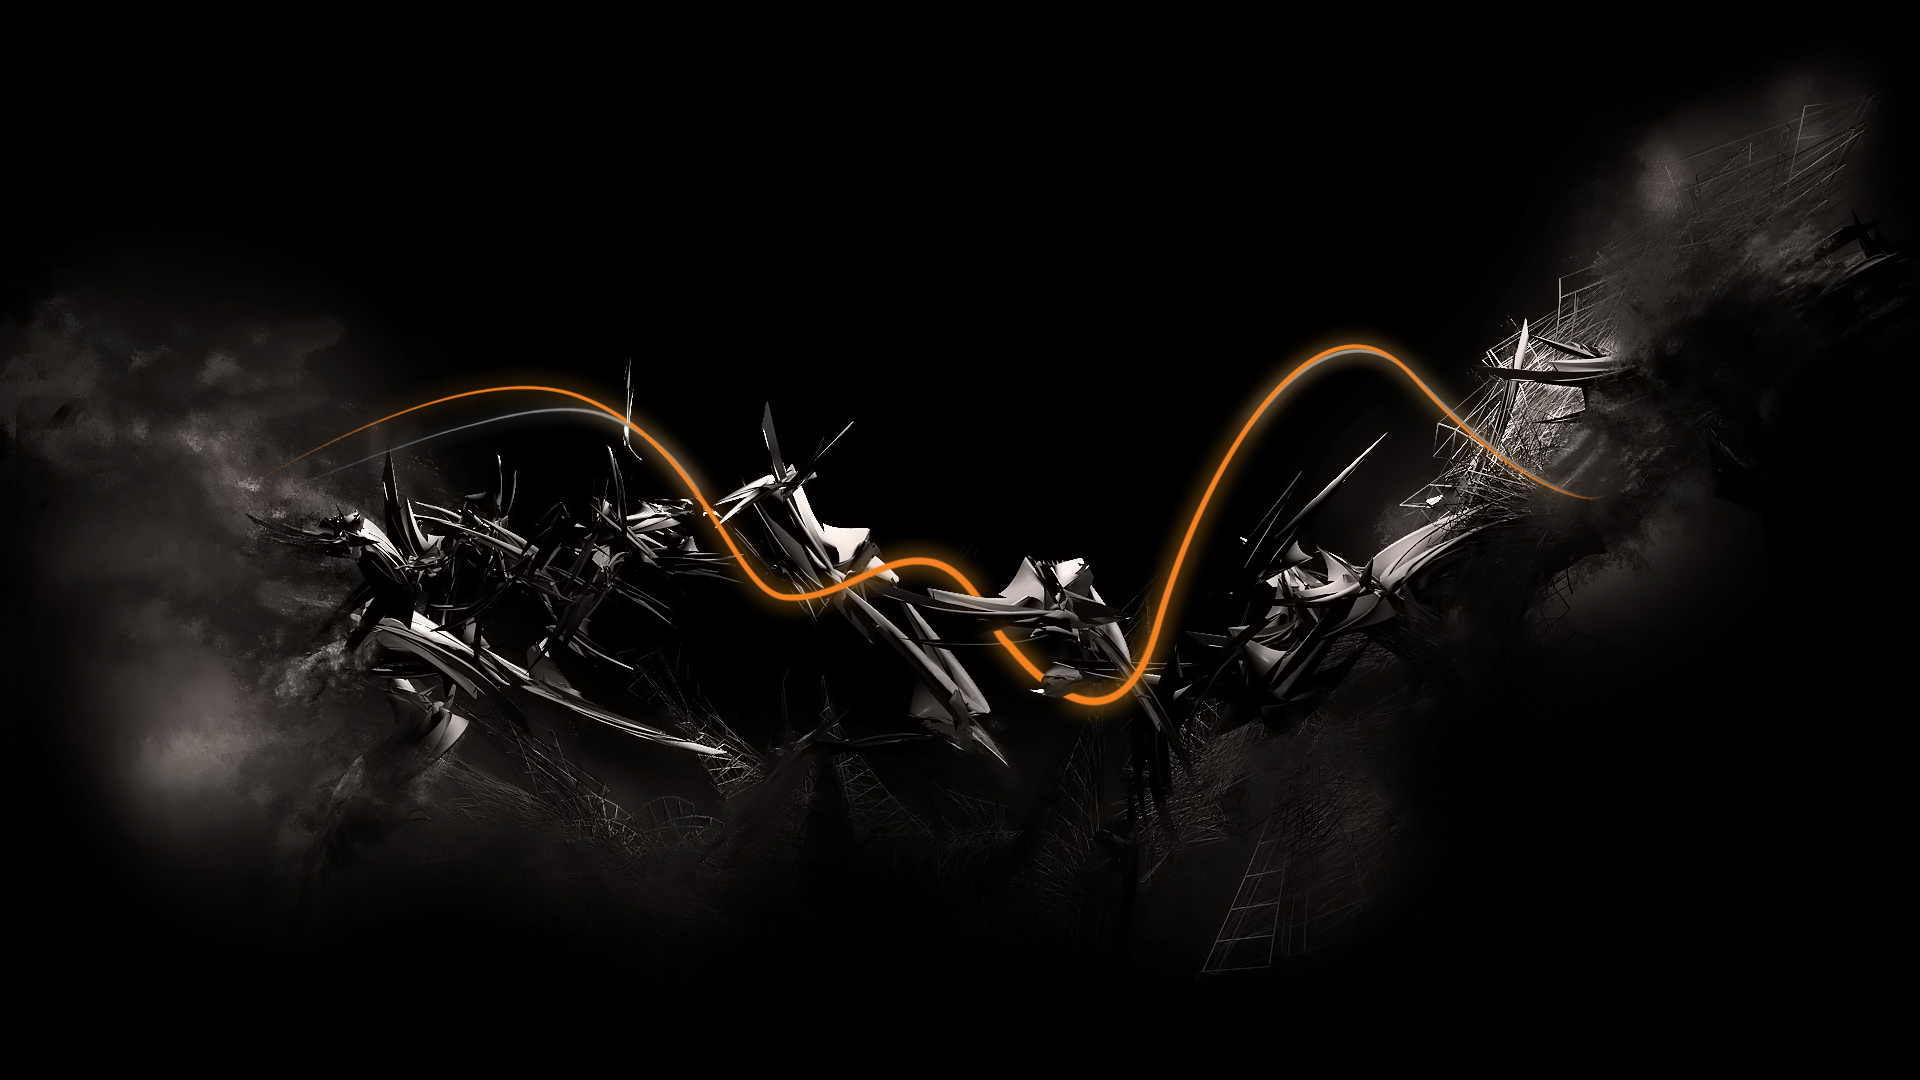 Free download Download Abstract Black Wallpaper 1920x1080 ...